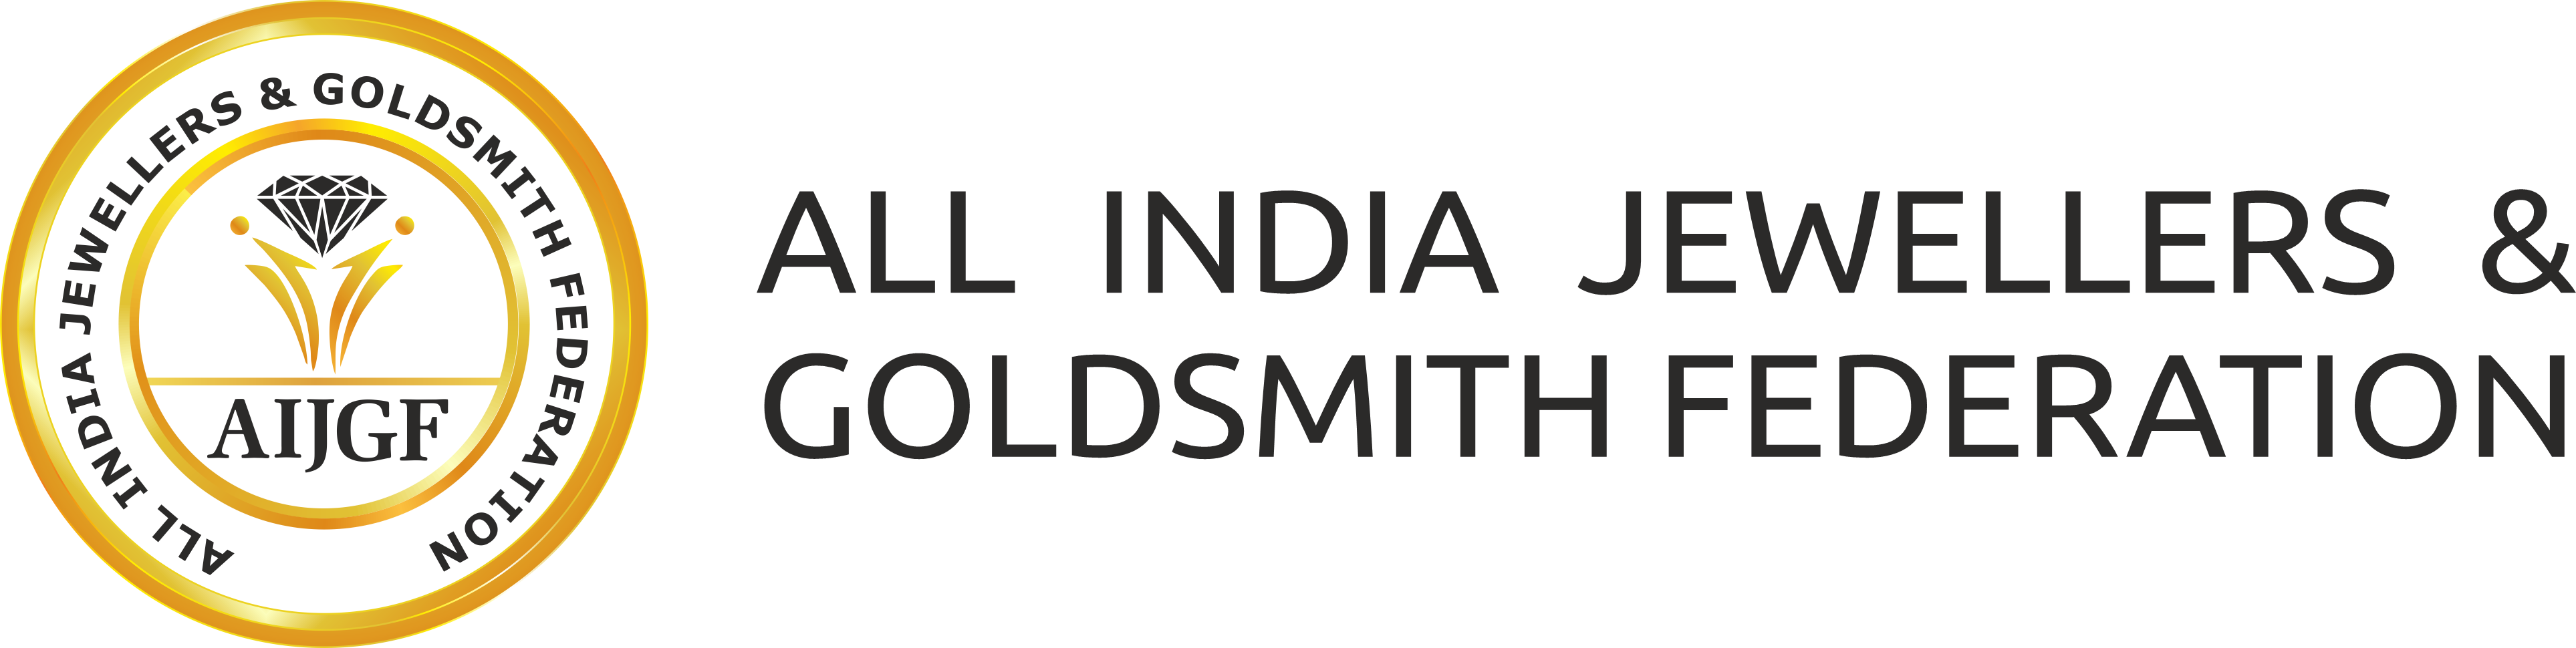 Name: All India Jewellers & Goldsmith Federation 